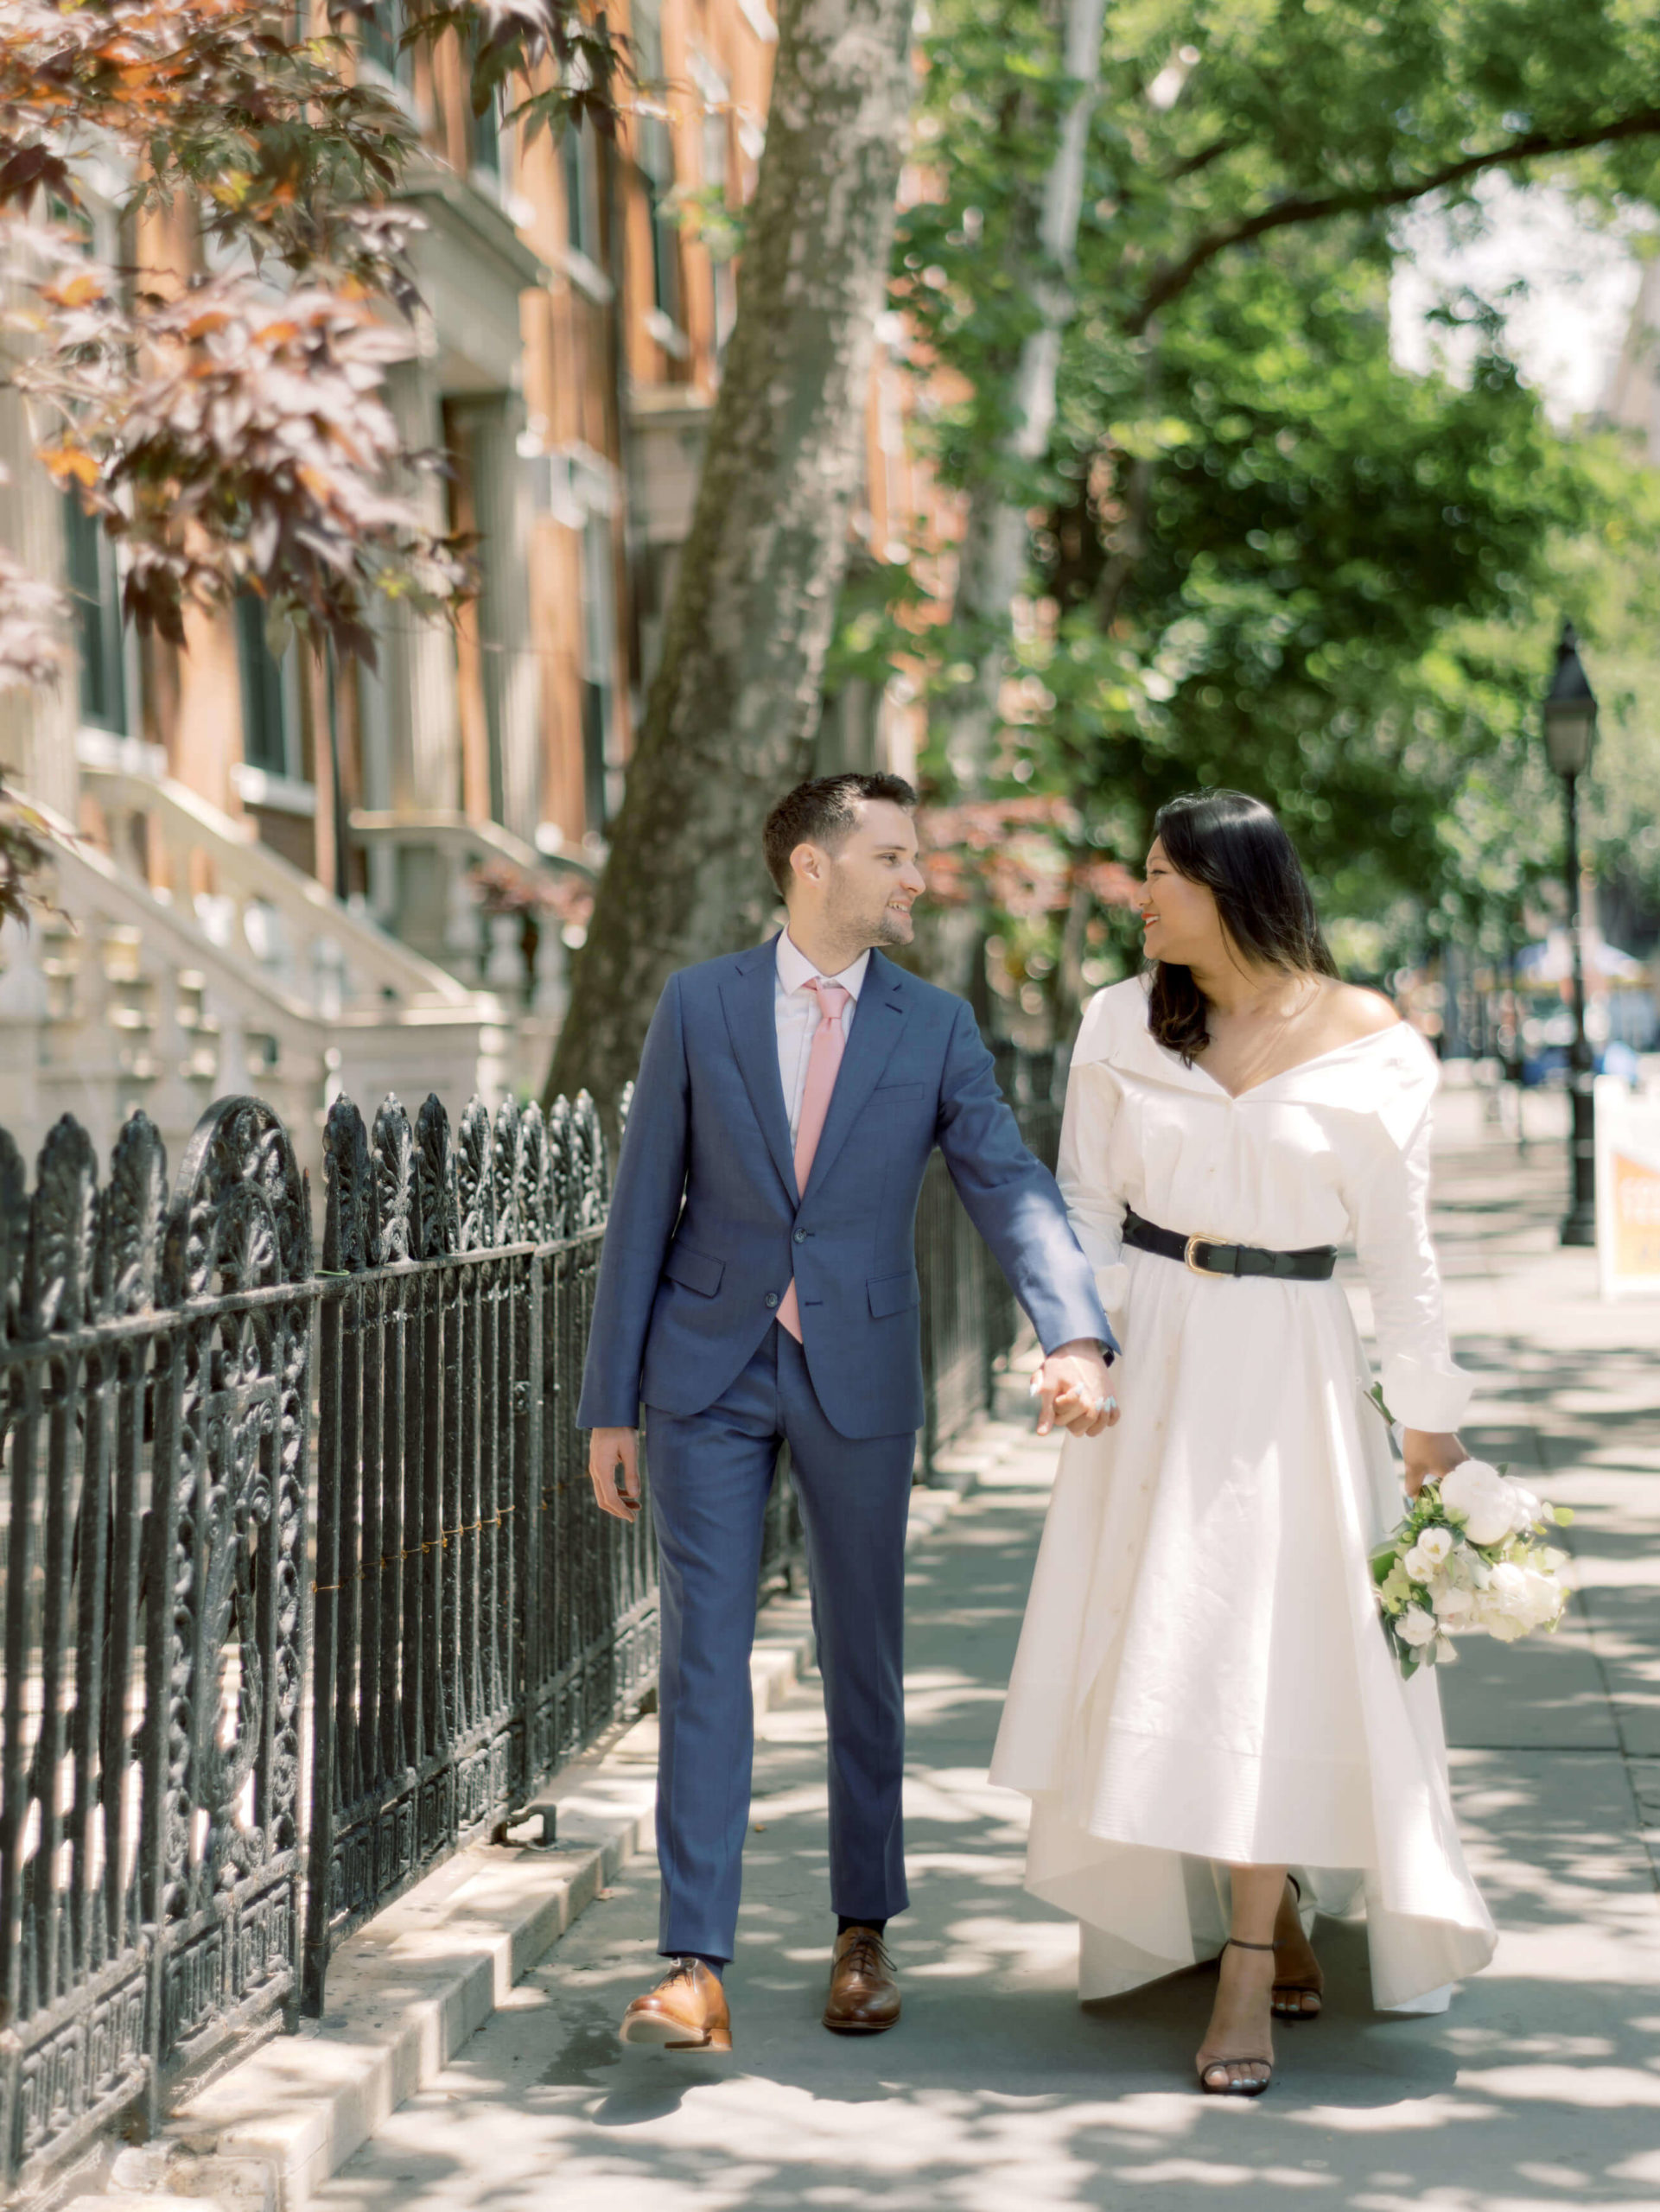 Editorial photo of the newlyweds walking in West Village. NYC City Hall wedding photos image by Jenny Fu Studio